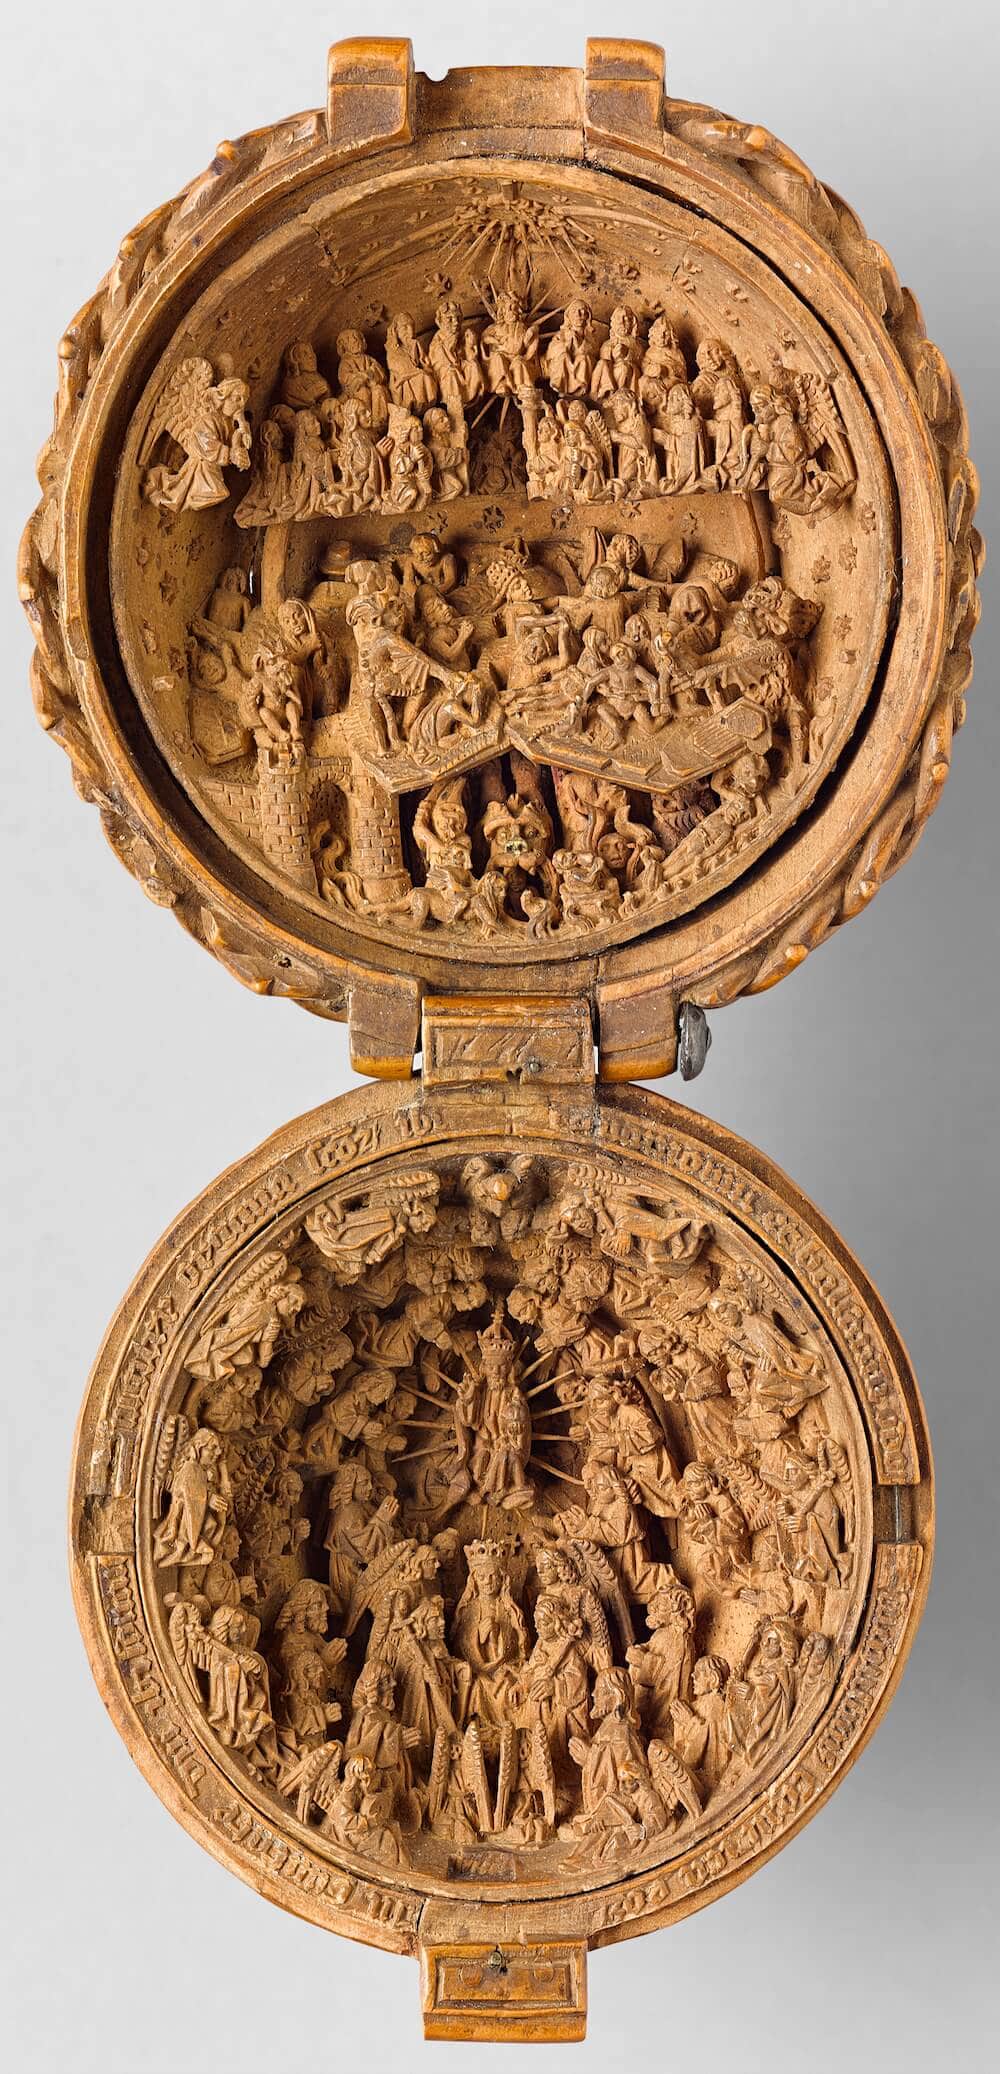 Beautifully Intricate Tiny Boxwood Carvings From The 16th Century (2)